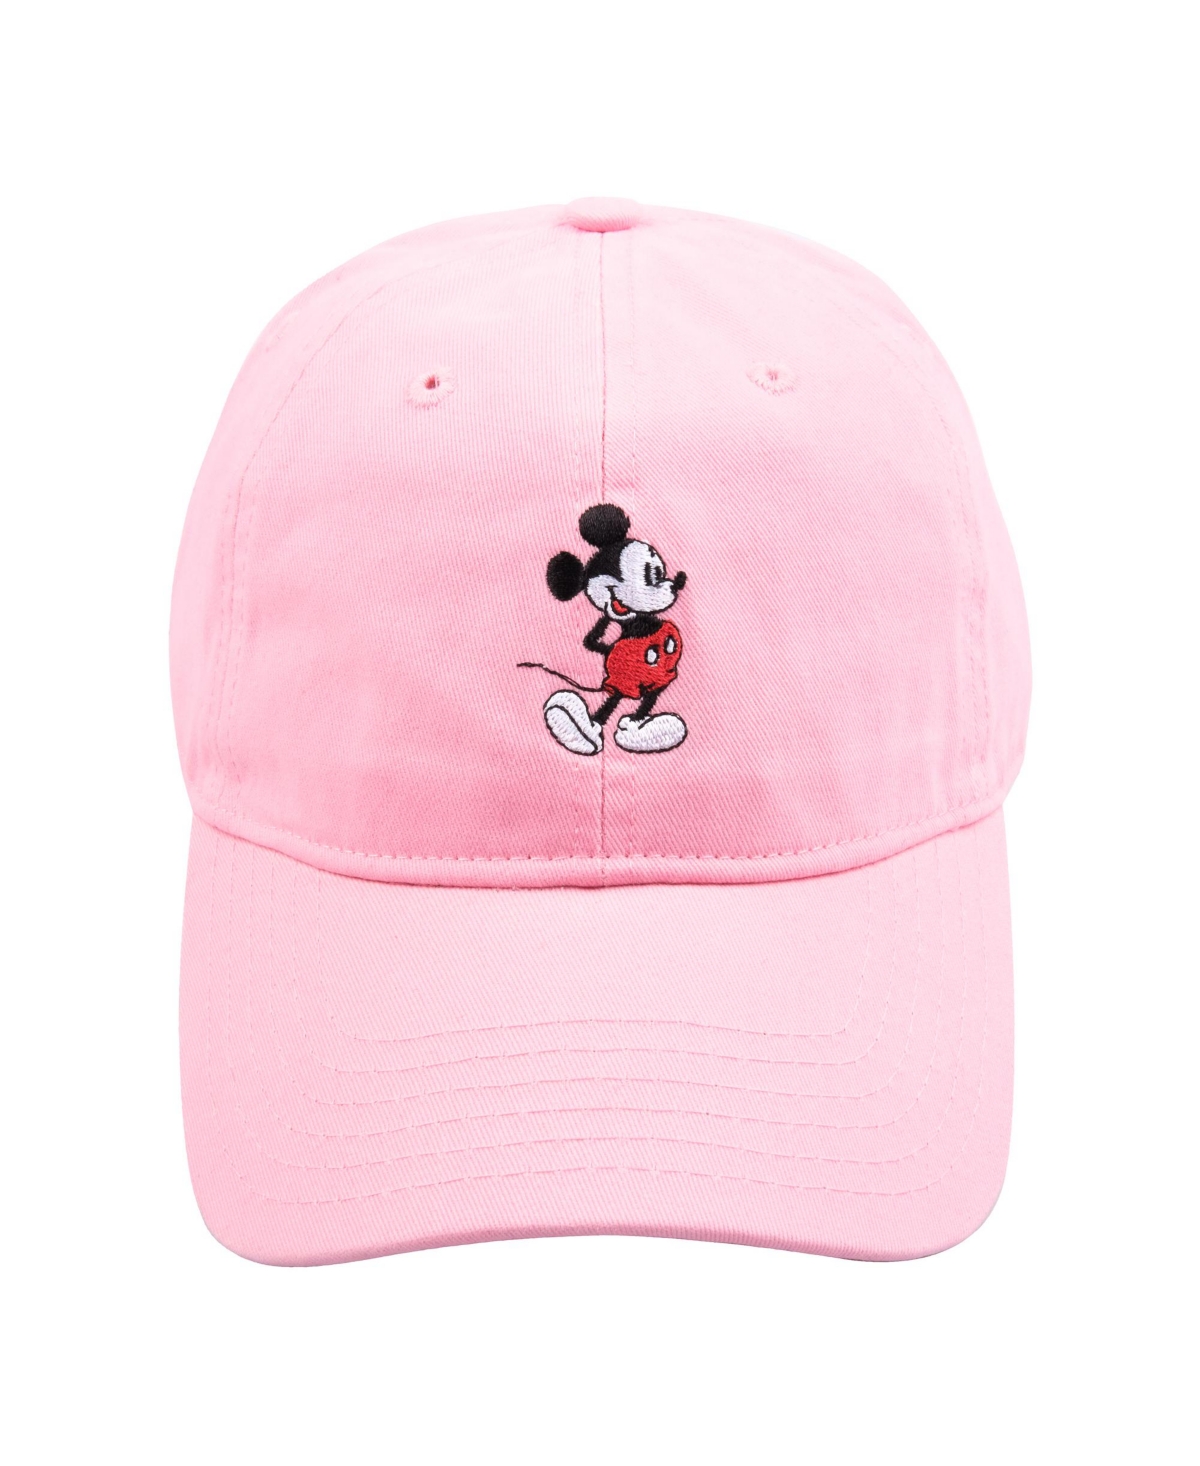 Disney Mickey Mouse Embroidered Cotton Adjustable Dad Hat with Curved Brim - Royal